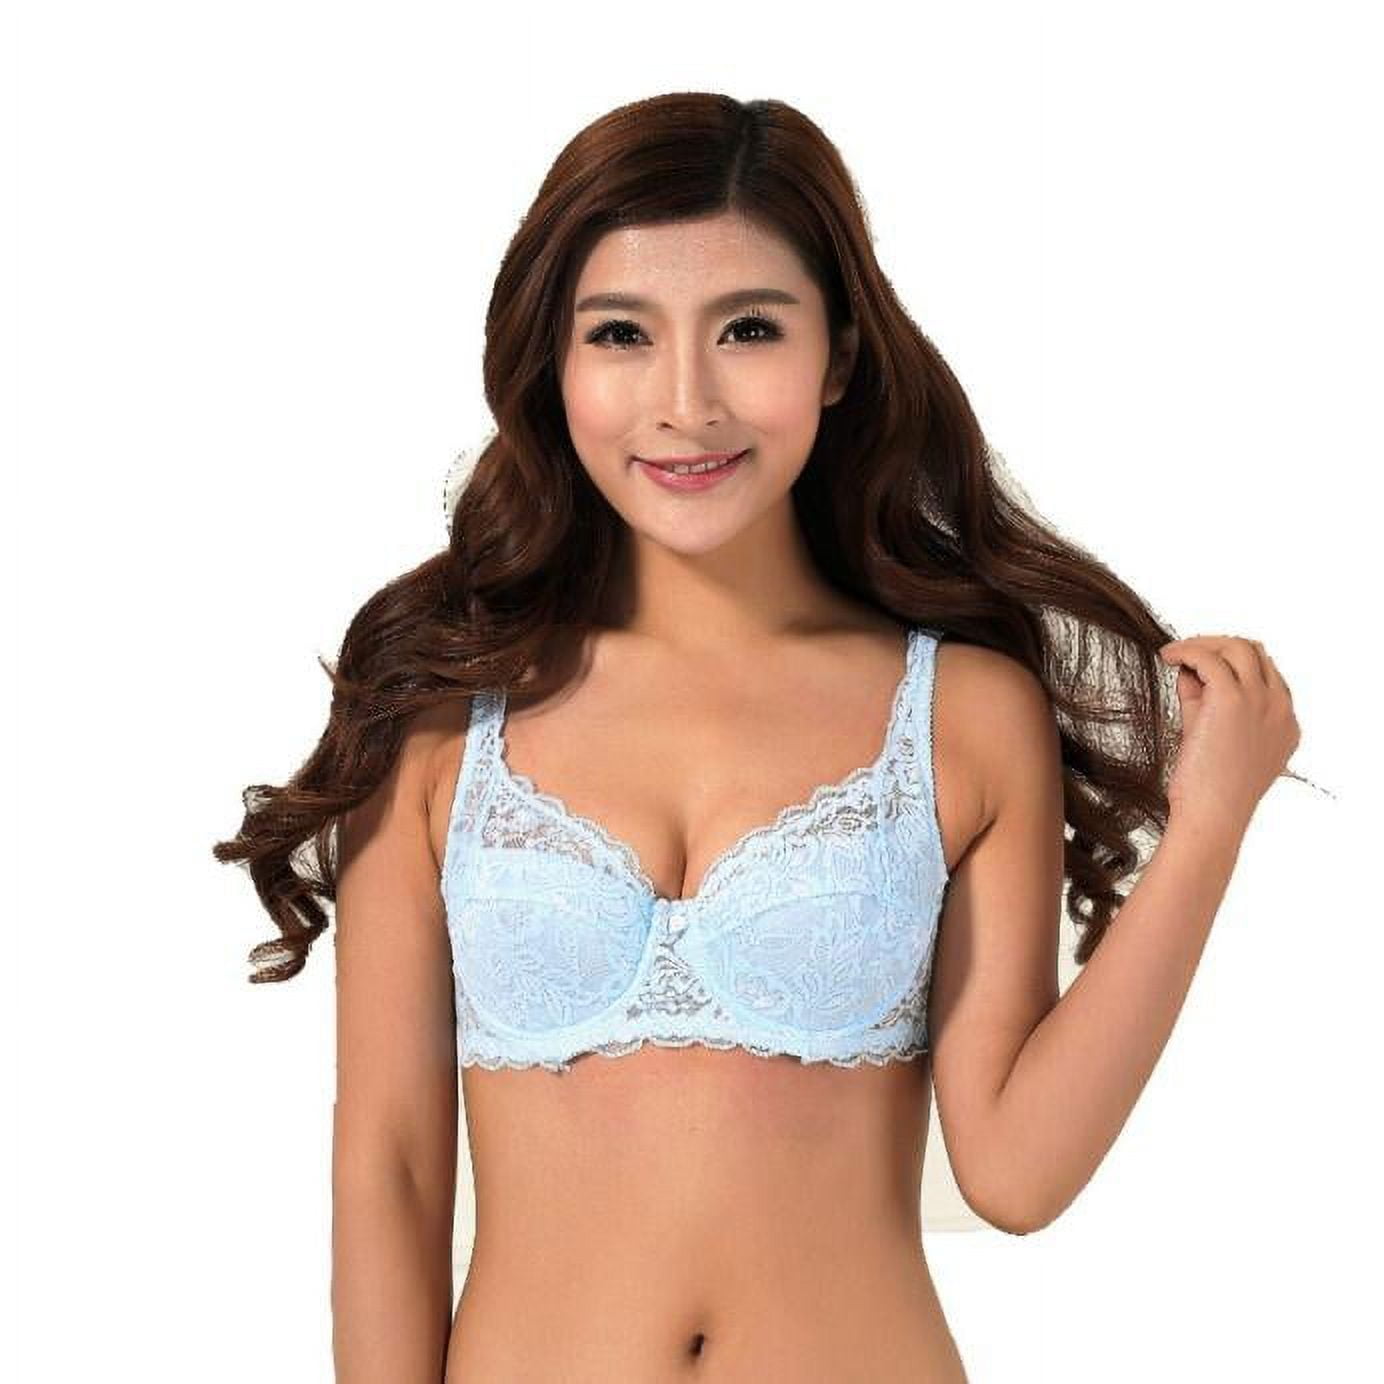 Blue Ultrathin Lace Lace Push Up Bra With Embroidery Plus Size C/D Cup  Womens Sexy Lingerie From Dou01, $10.05